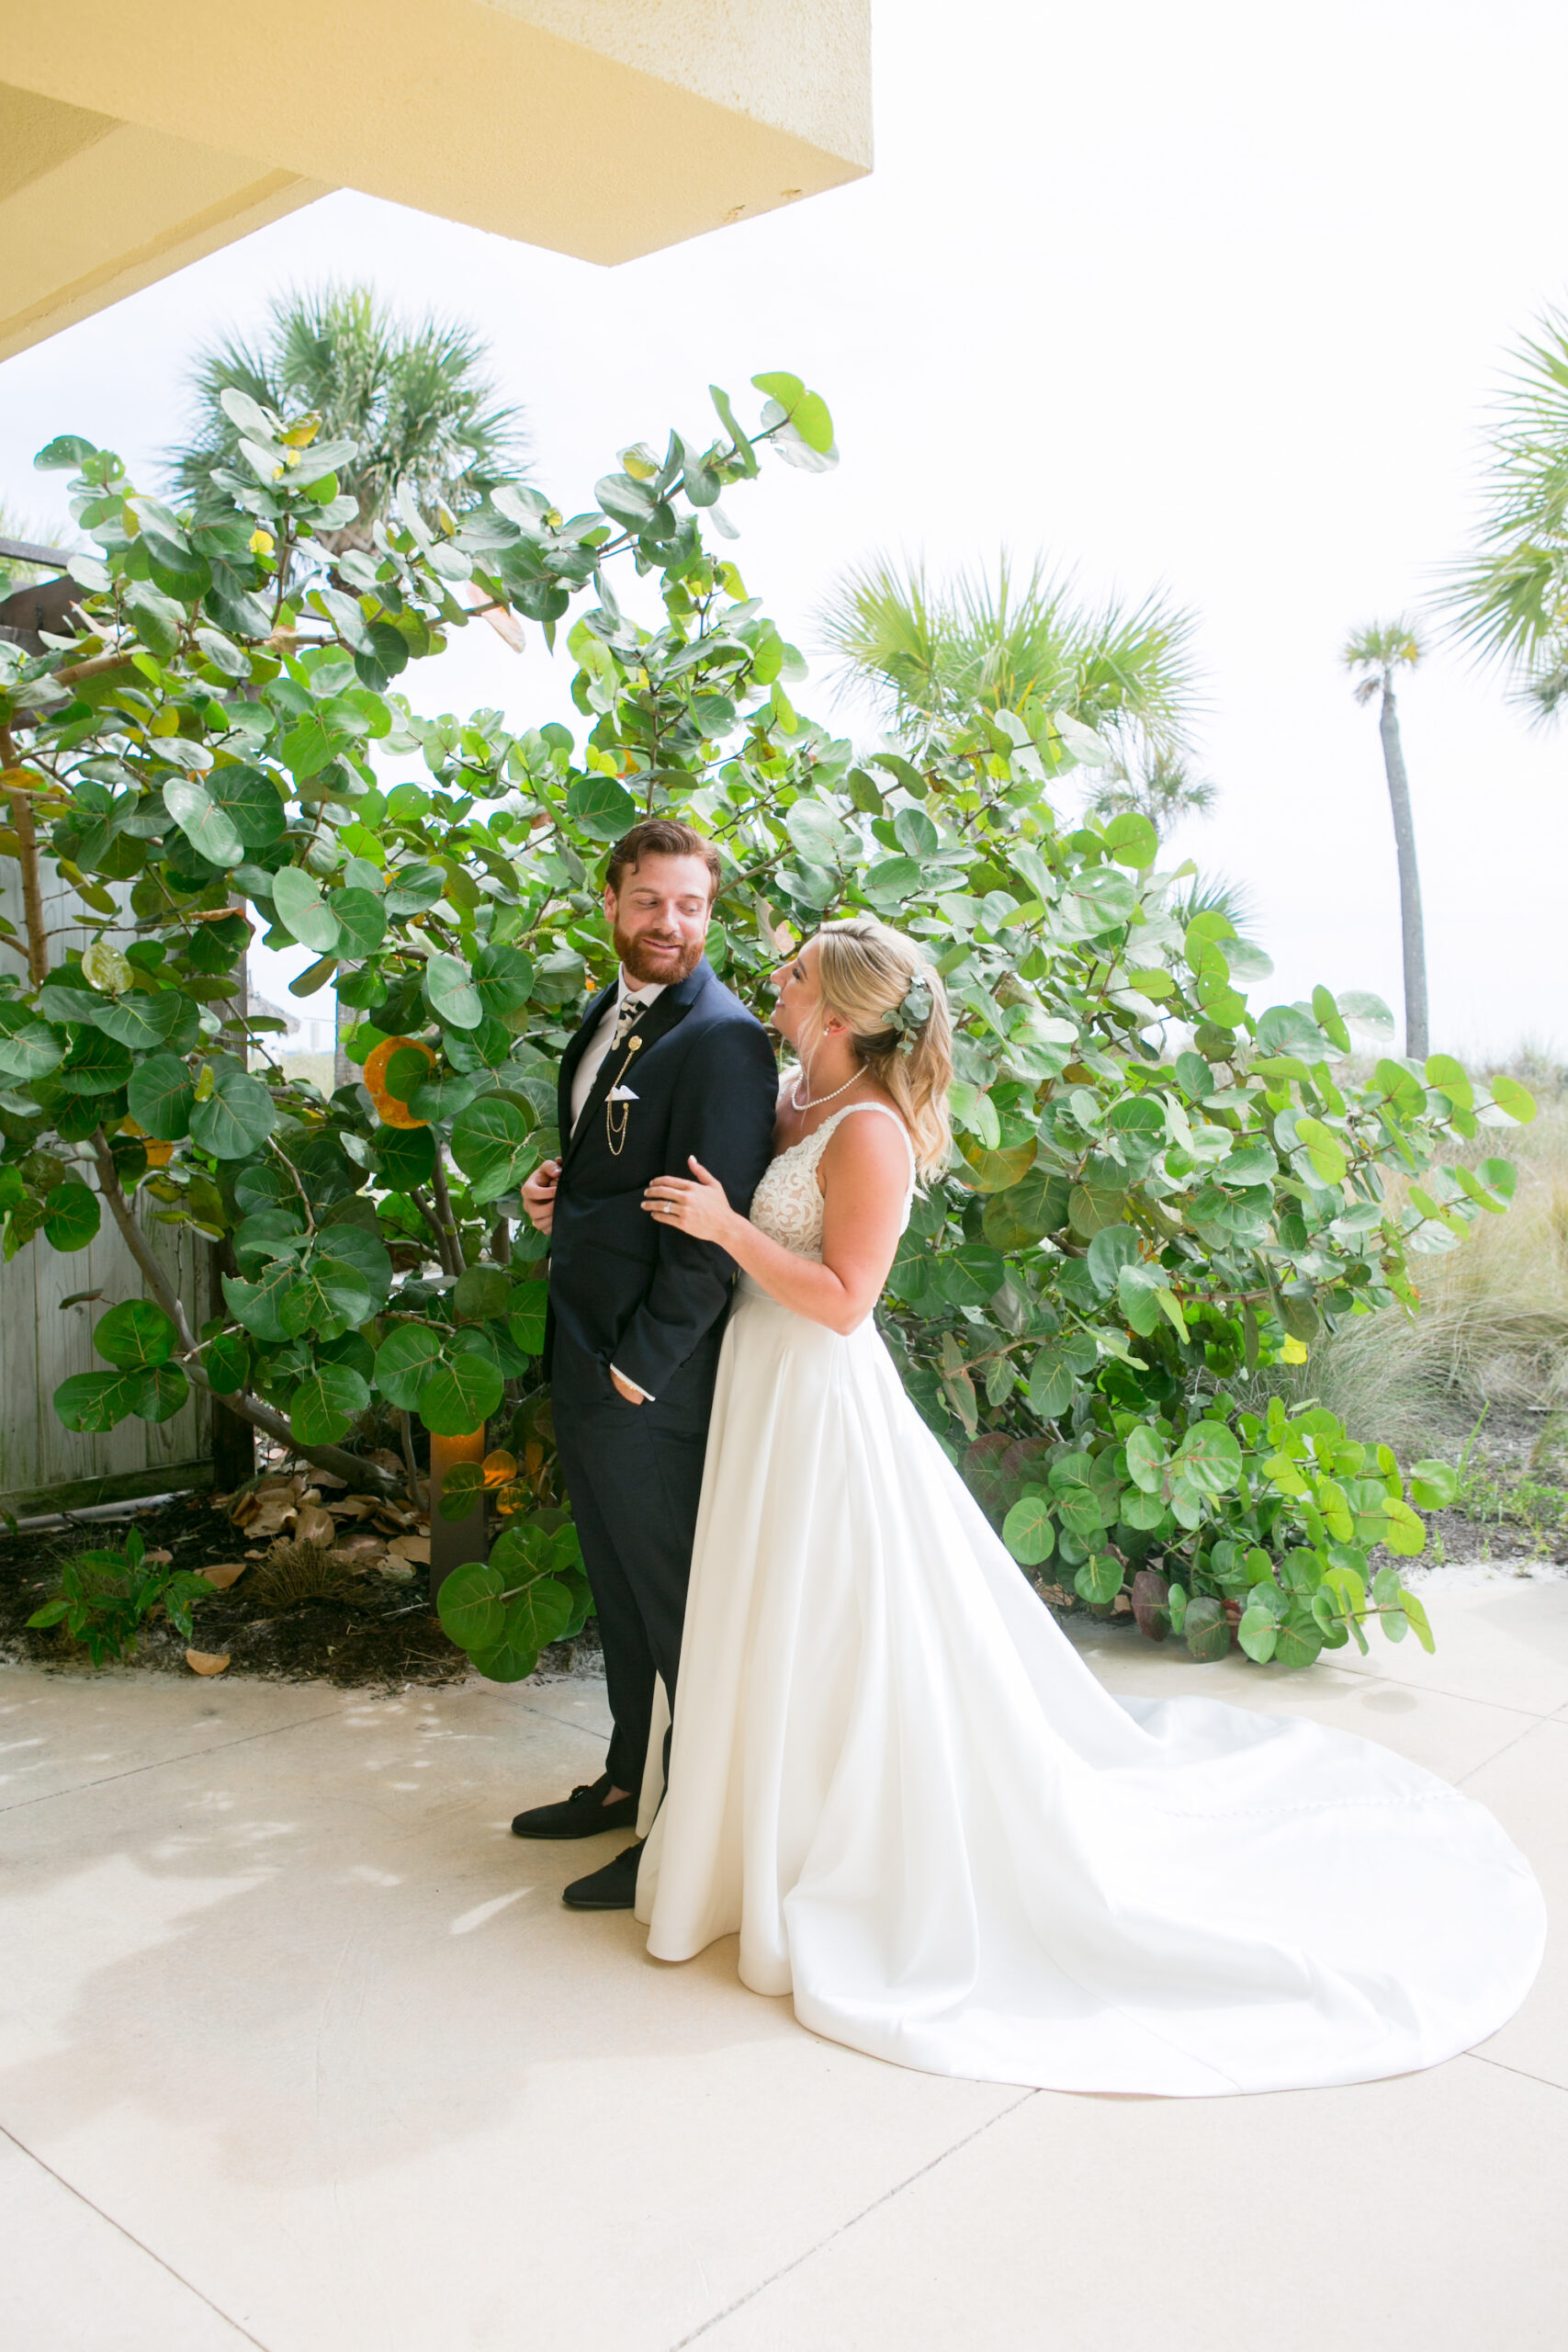 Romantic Bride and Groom Wedding Portrait | St. Pete Photographer Carrie Wildes Photography